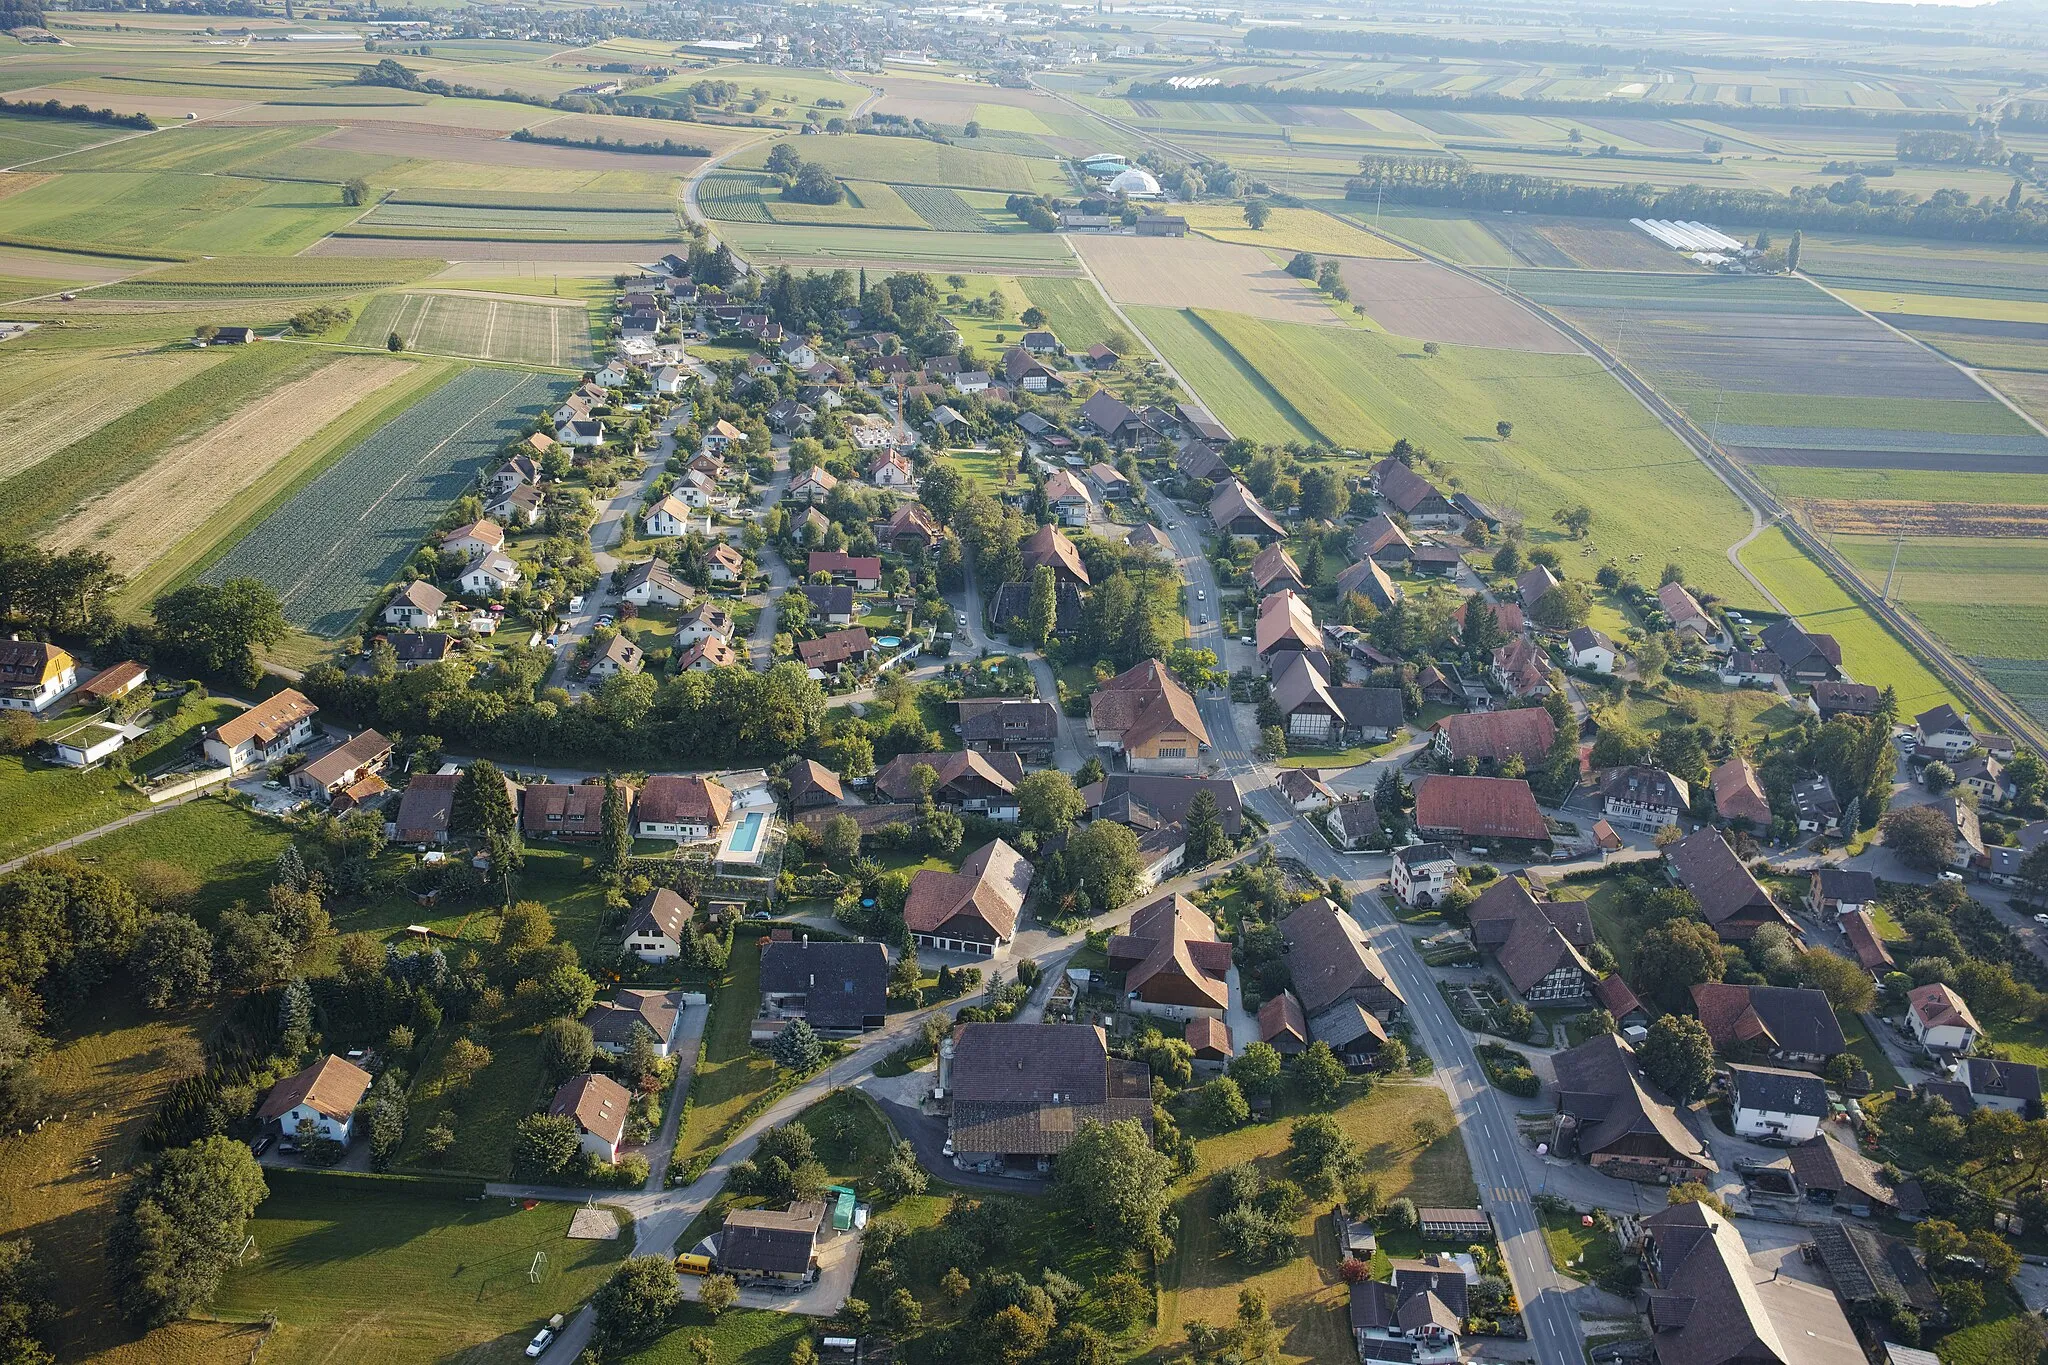 Photo showing: Municipality of Fräschels, canton of Fribourg, Switzerland. Picture taken from a hot air balloon. The Papiliorama (butterfly zoo) in the municipality of Kerzers is visible at the top of the image.